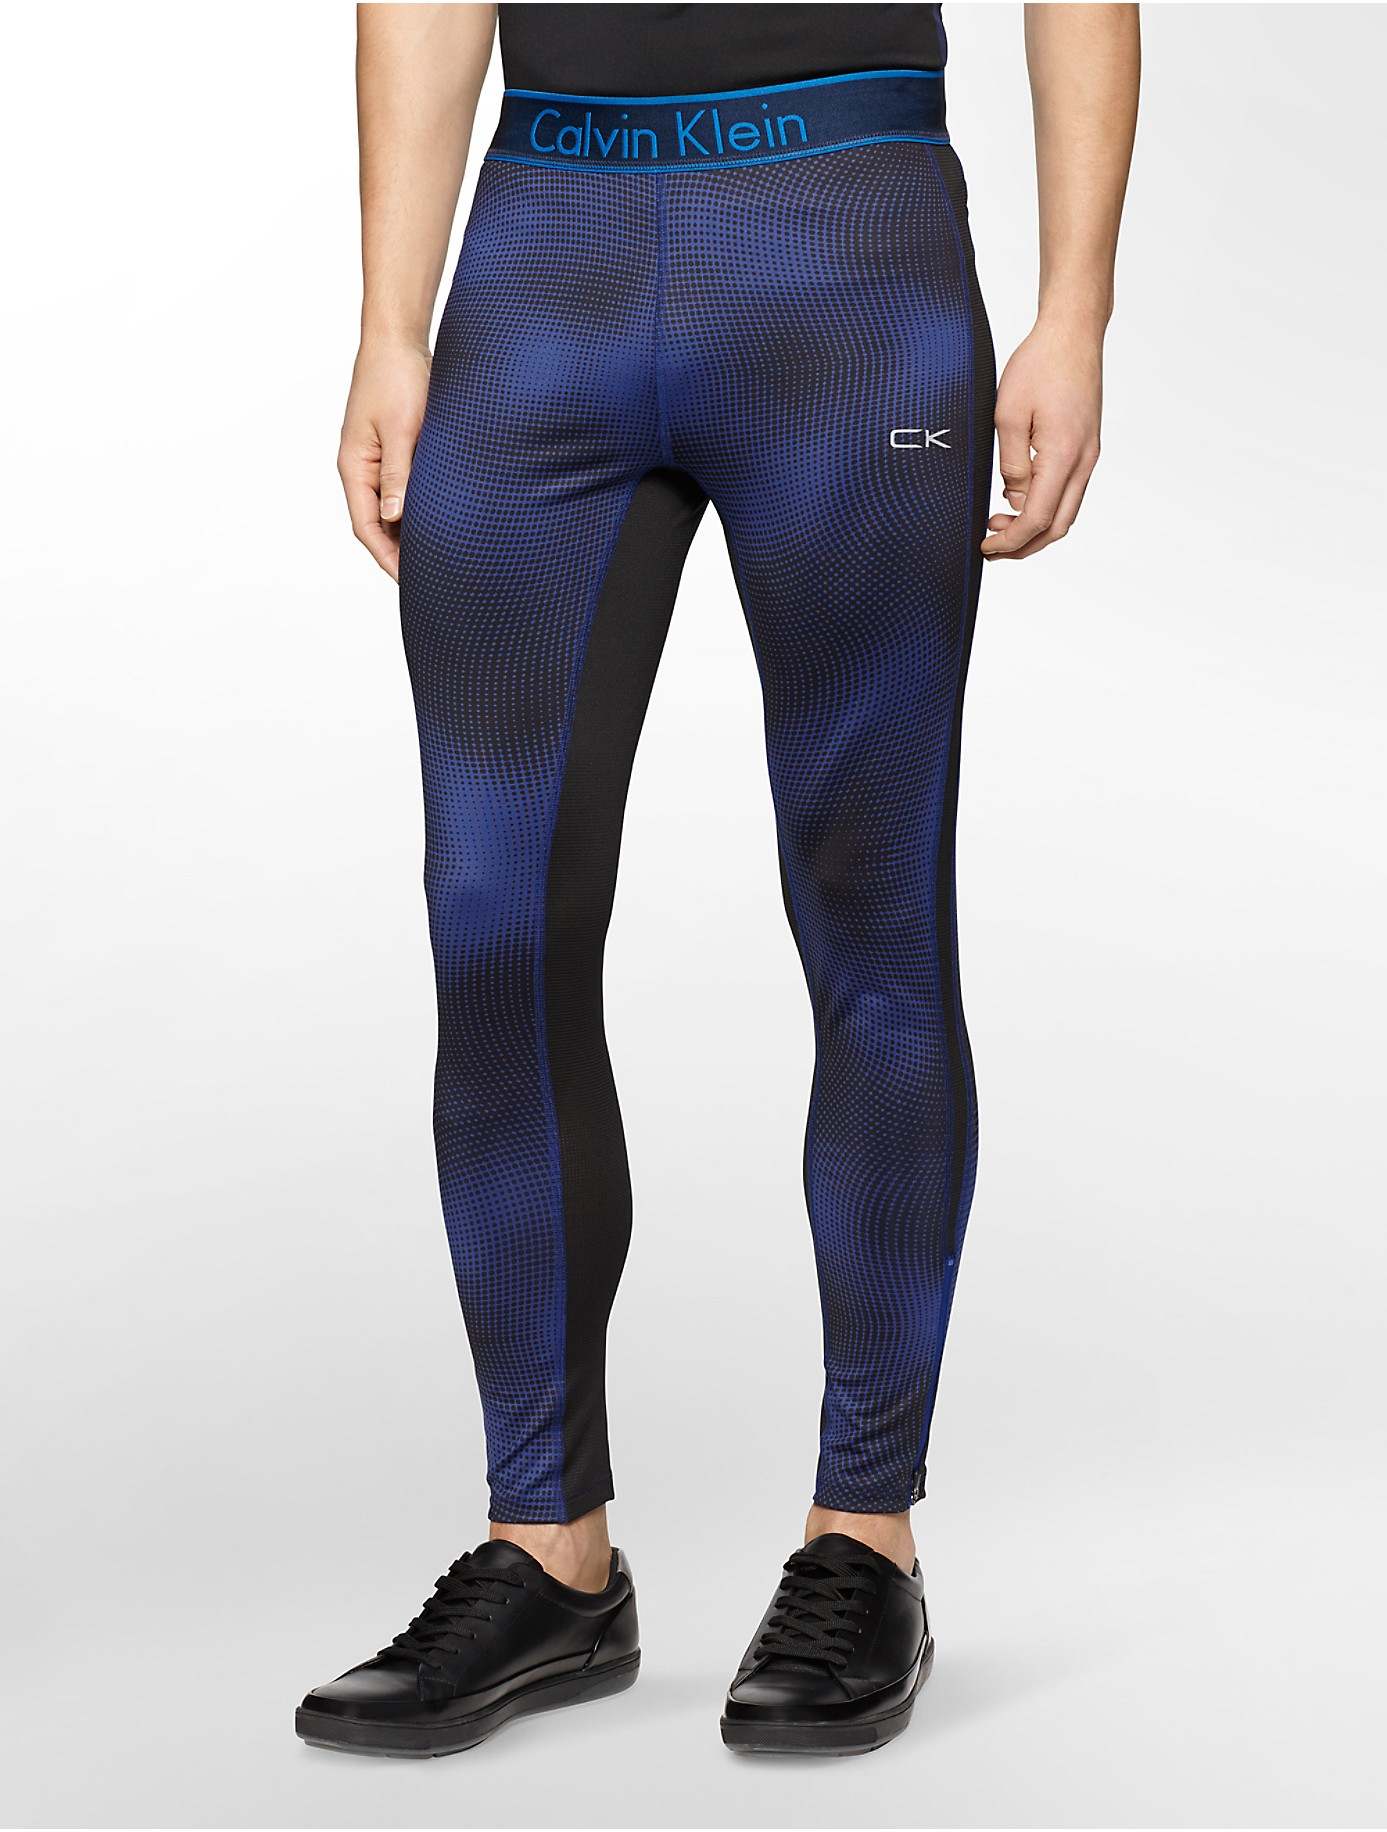 Calvin Klein White Label Performance Dot Stretch Compression Pants in ...